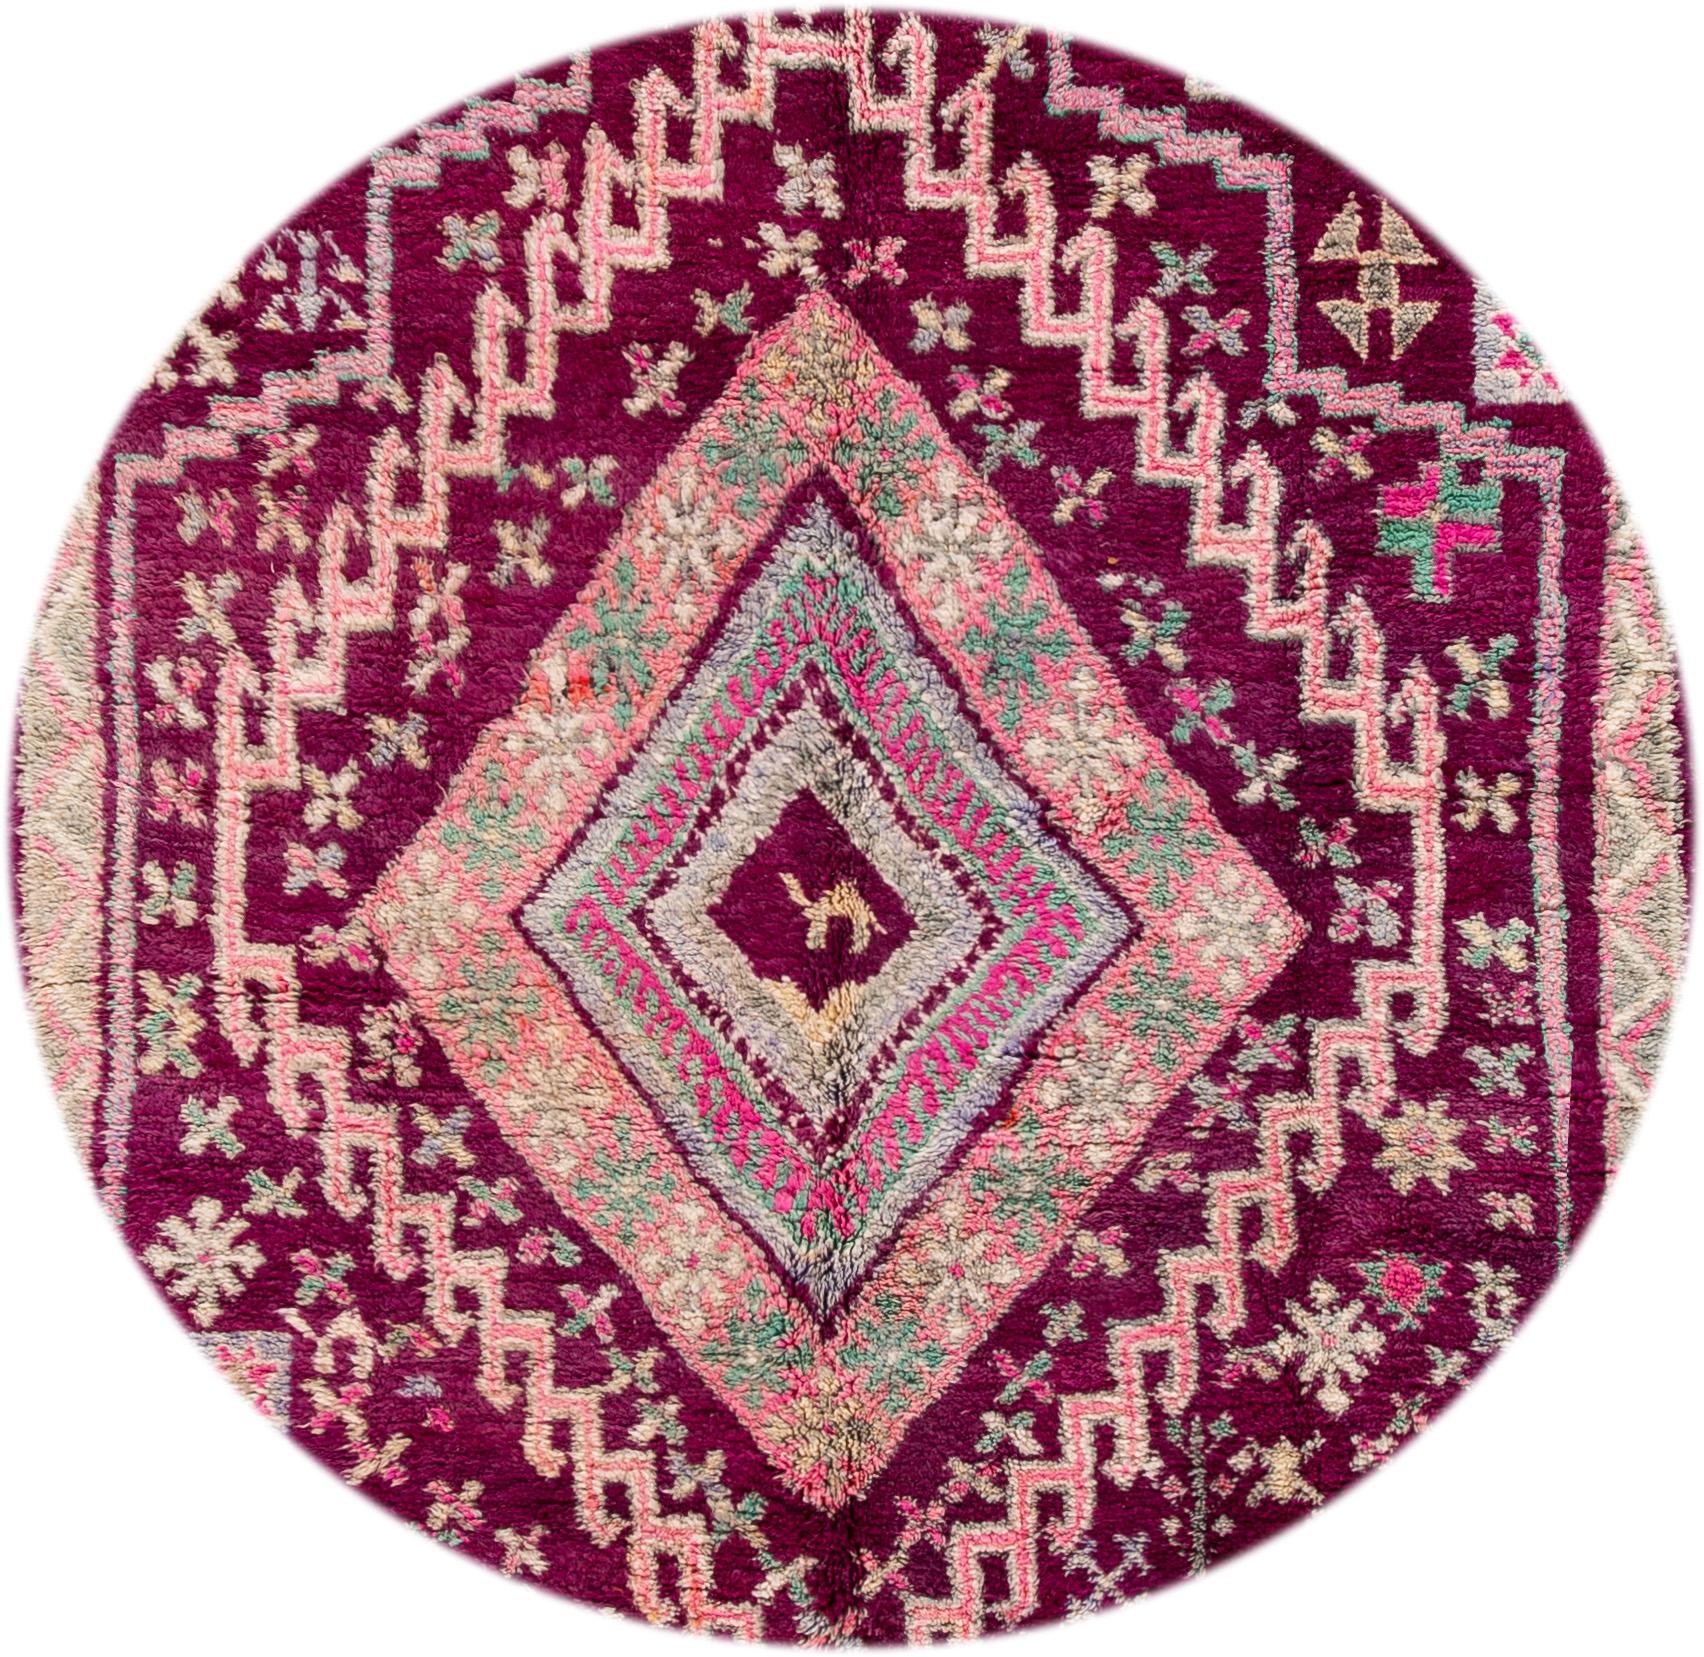 Beautiful hand knotted vintage tribal wool rug. This rug has a purple field with various pink and green accents, circa 1970.

This rug measures 6'6